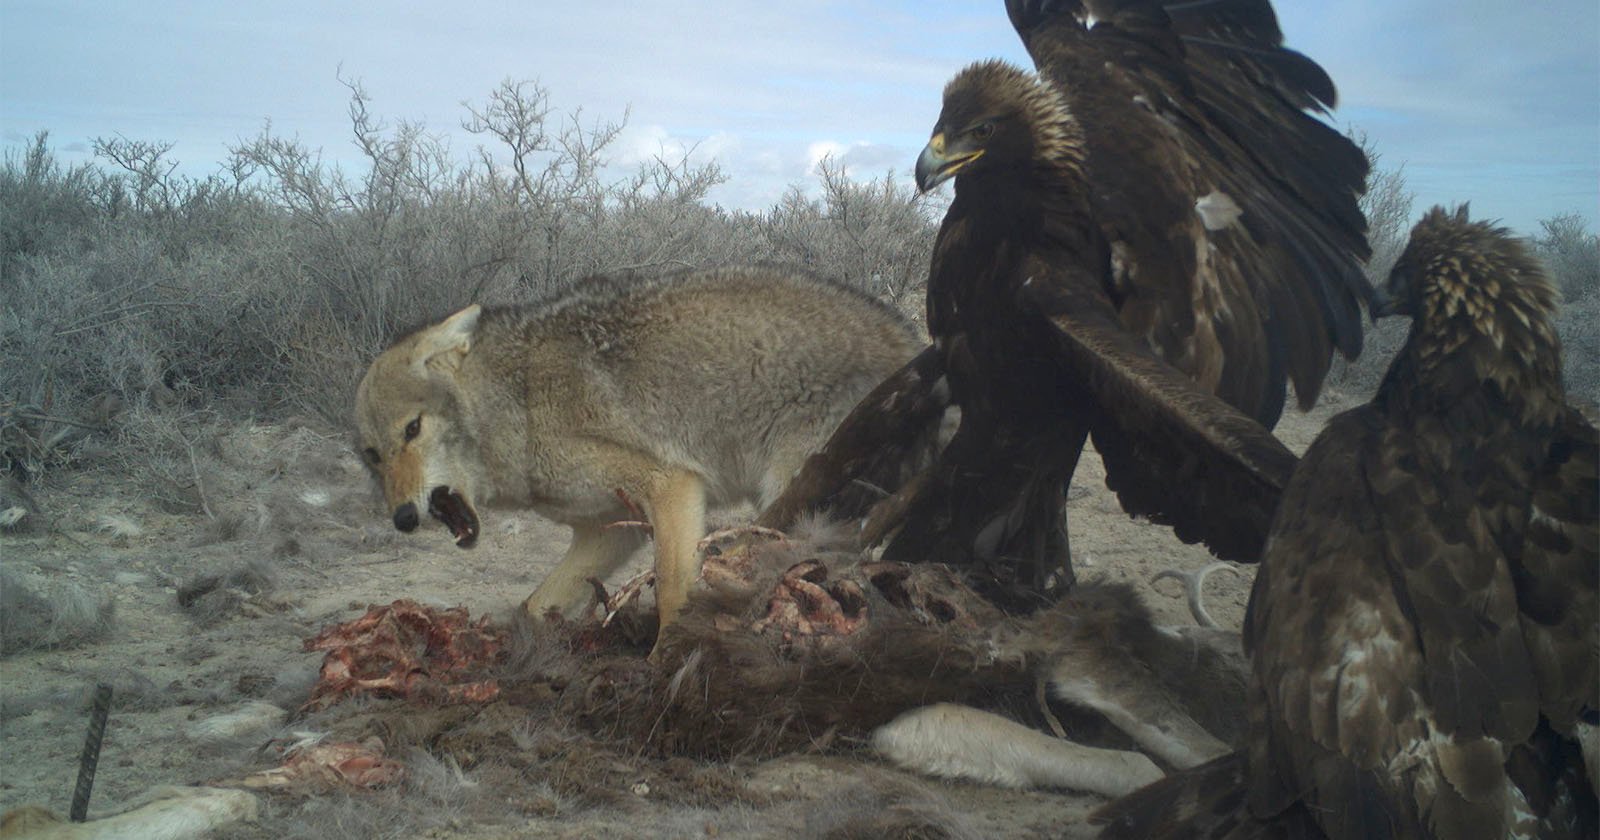 Trail camera captures fight between coyote and eagle